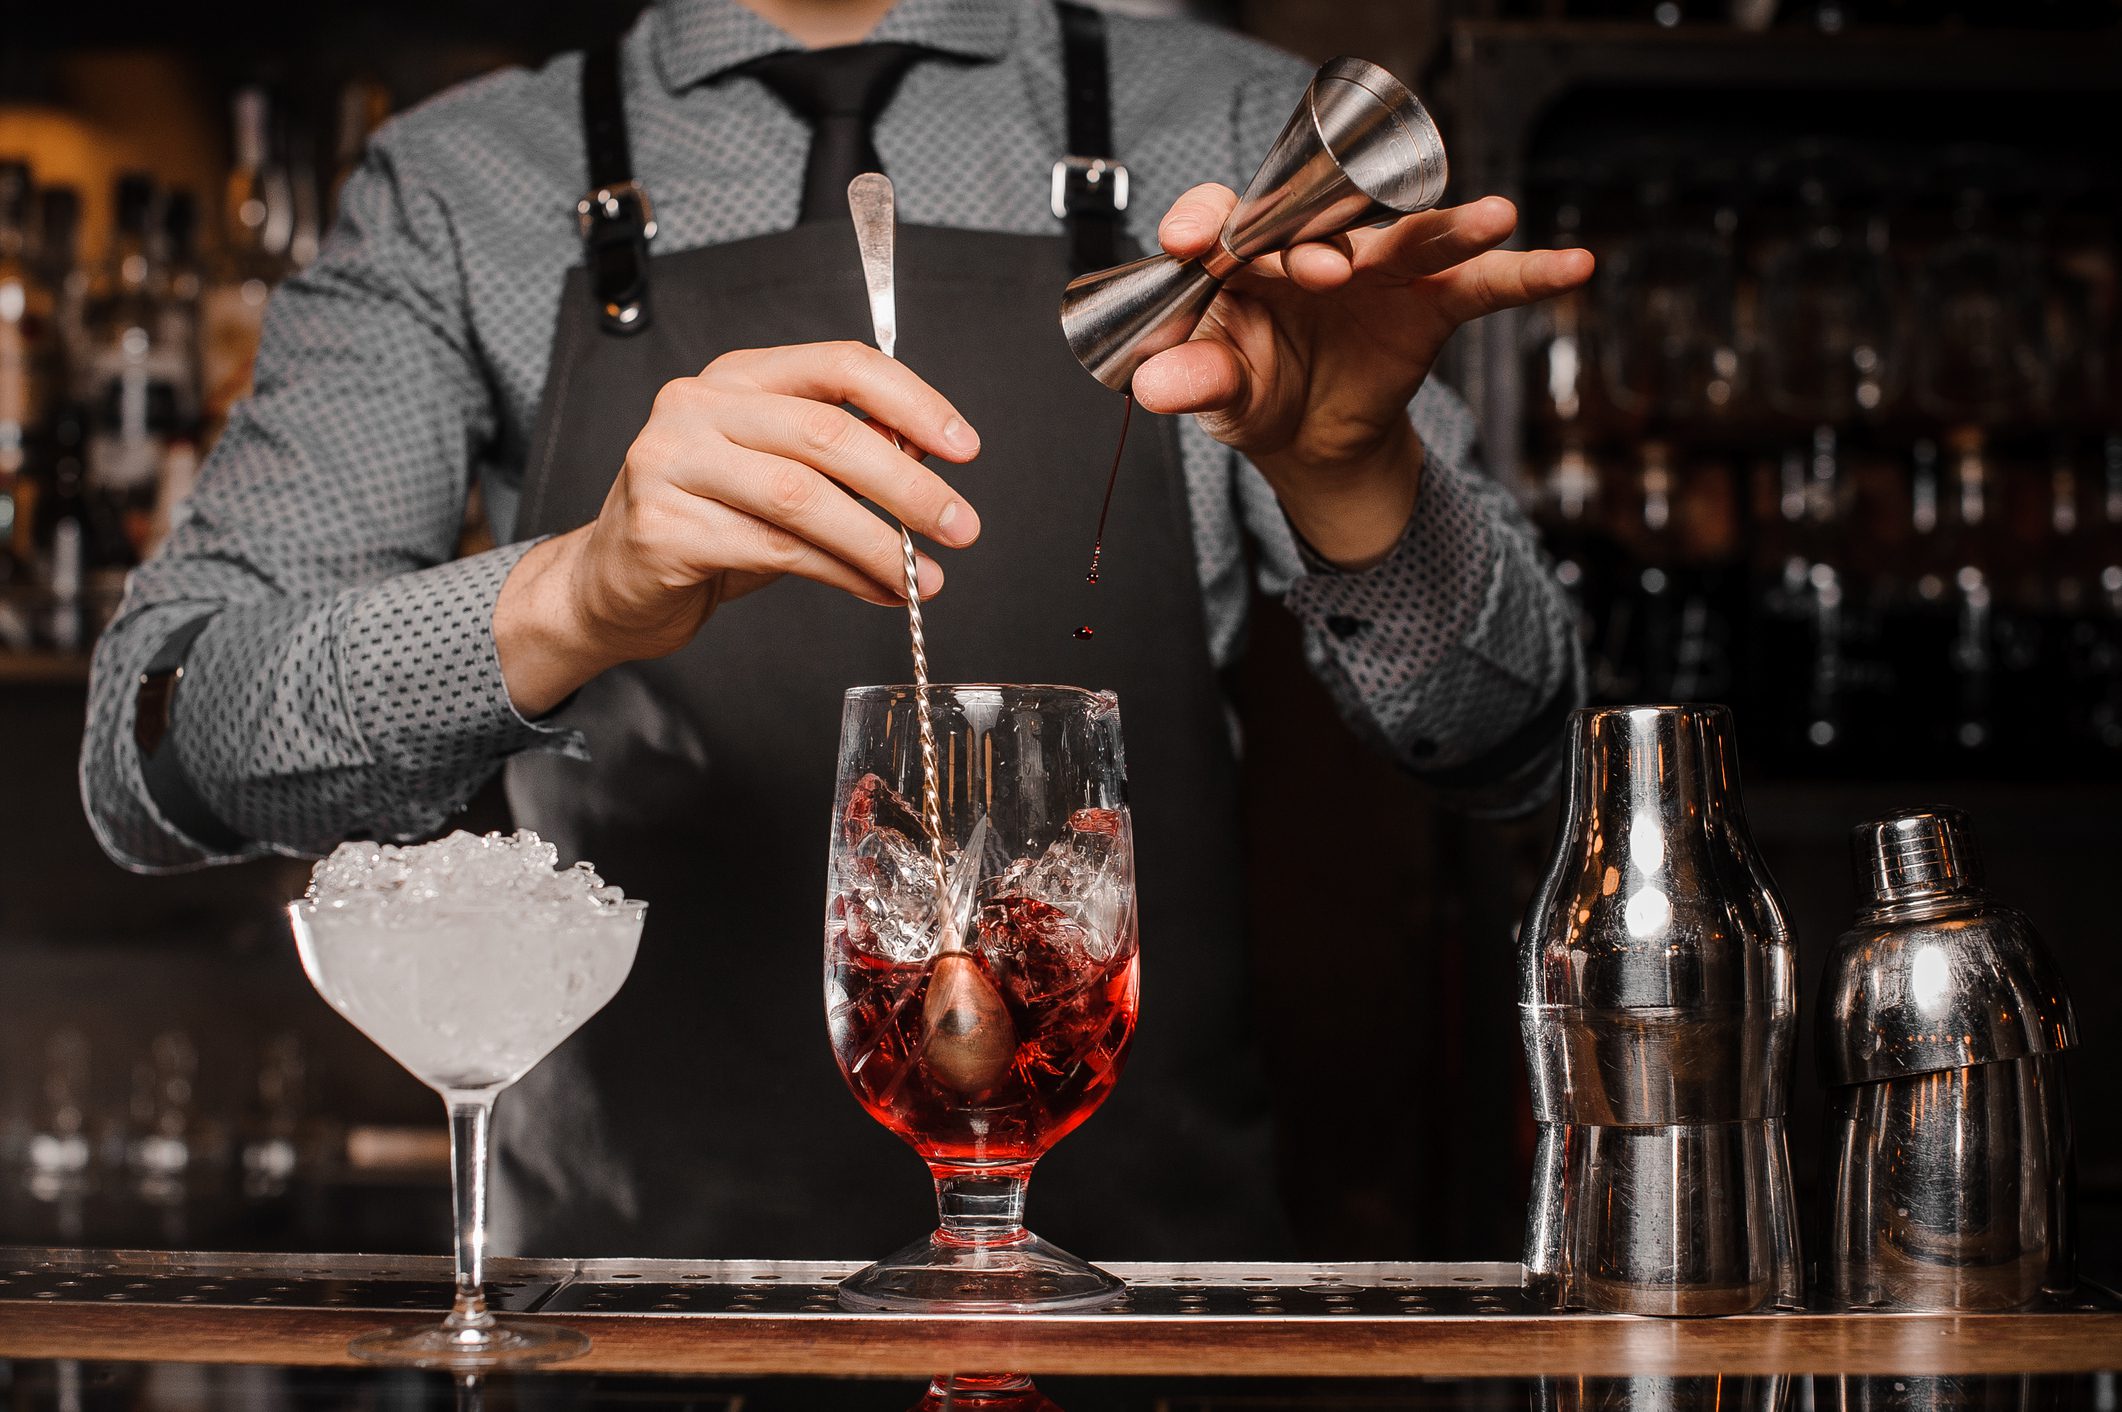 Bartenders may be working harder and making more money after quarantine.